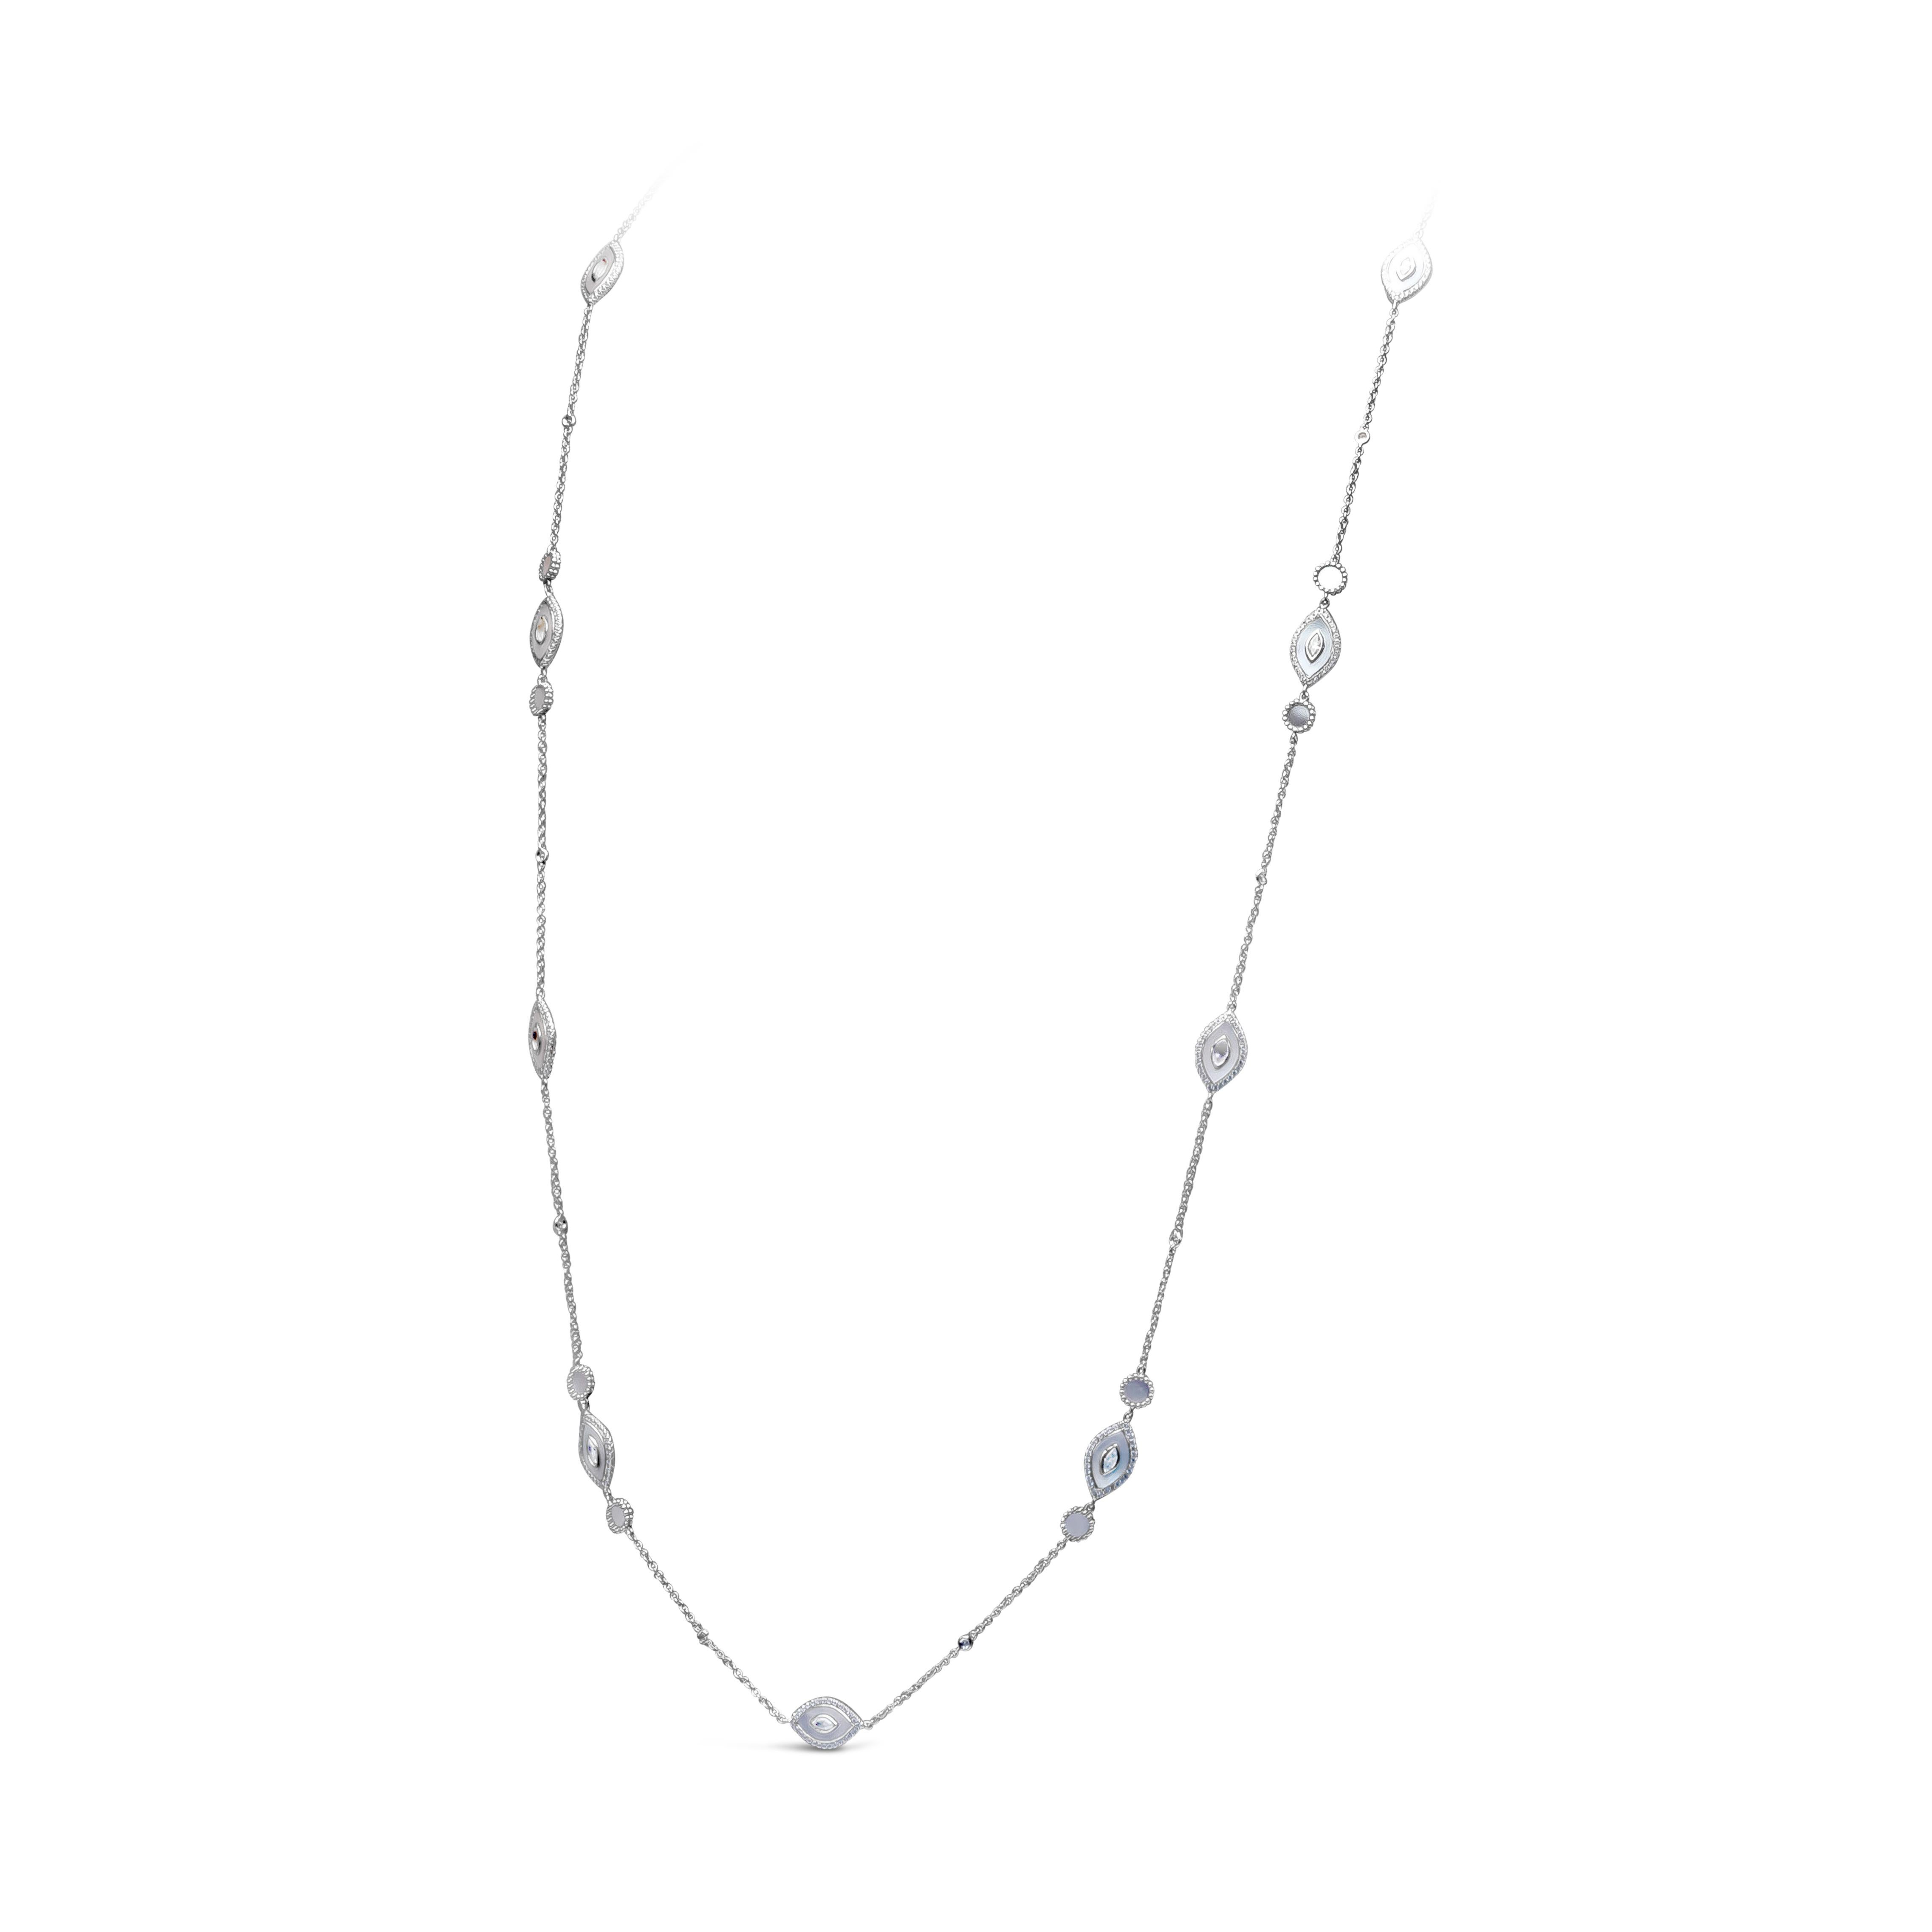 Modern Roman Malakov 3.77 Carats Total Diamonds and Mother of Pearl Long Necklace For Sale